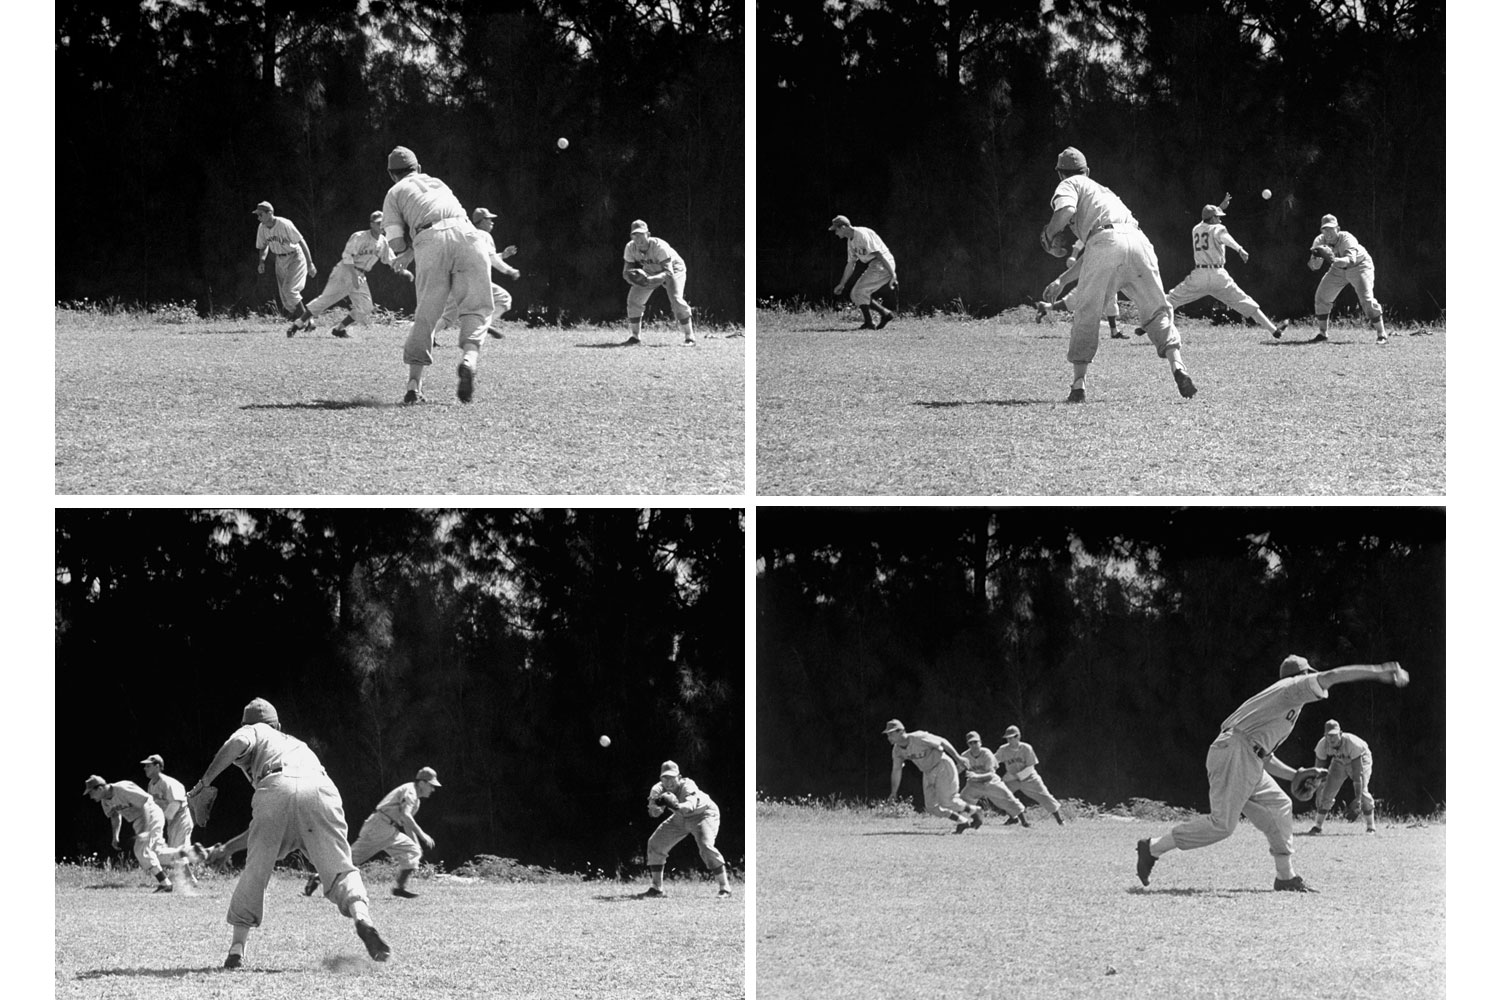 Practicing base-running and pick-off attempts at Dodgertown, Vero Beach, Fla., 1948.